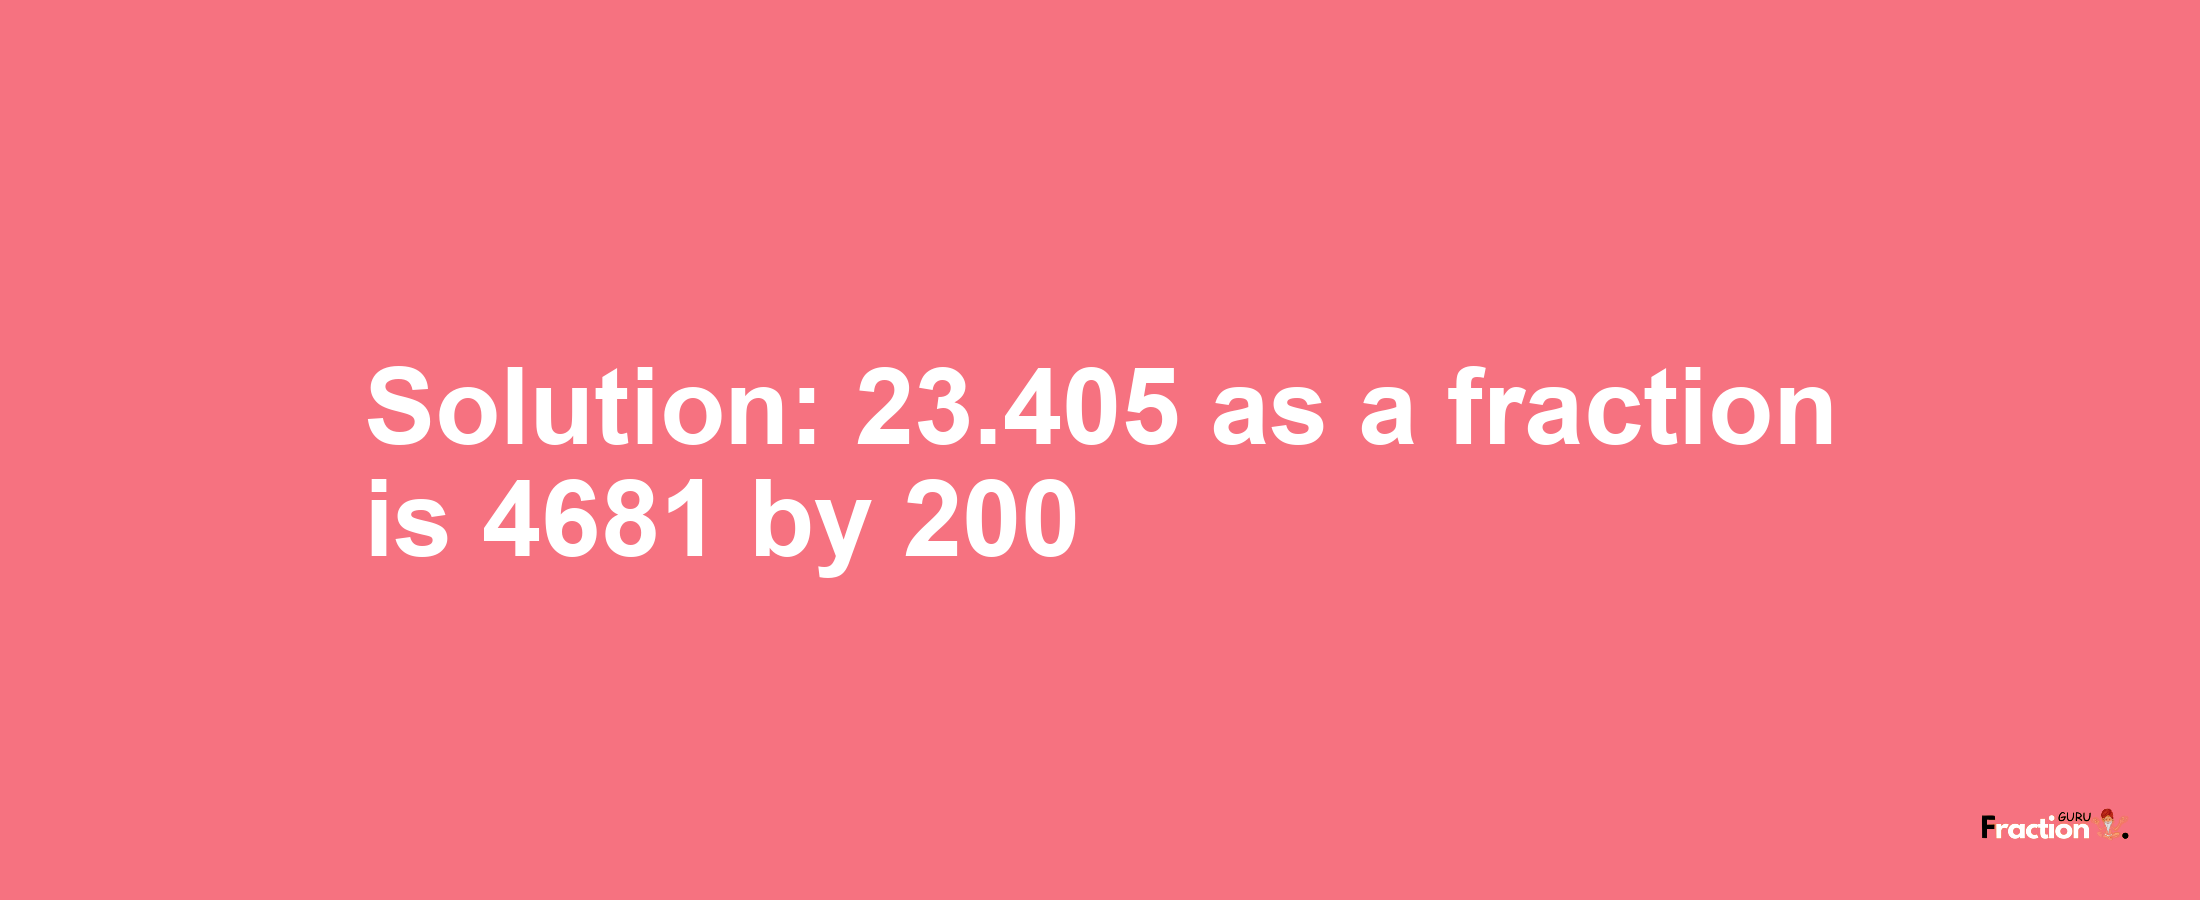 Solution:23.405 as a fraction is 4681/200